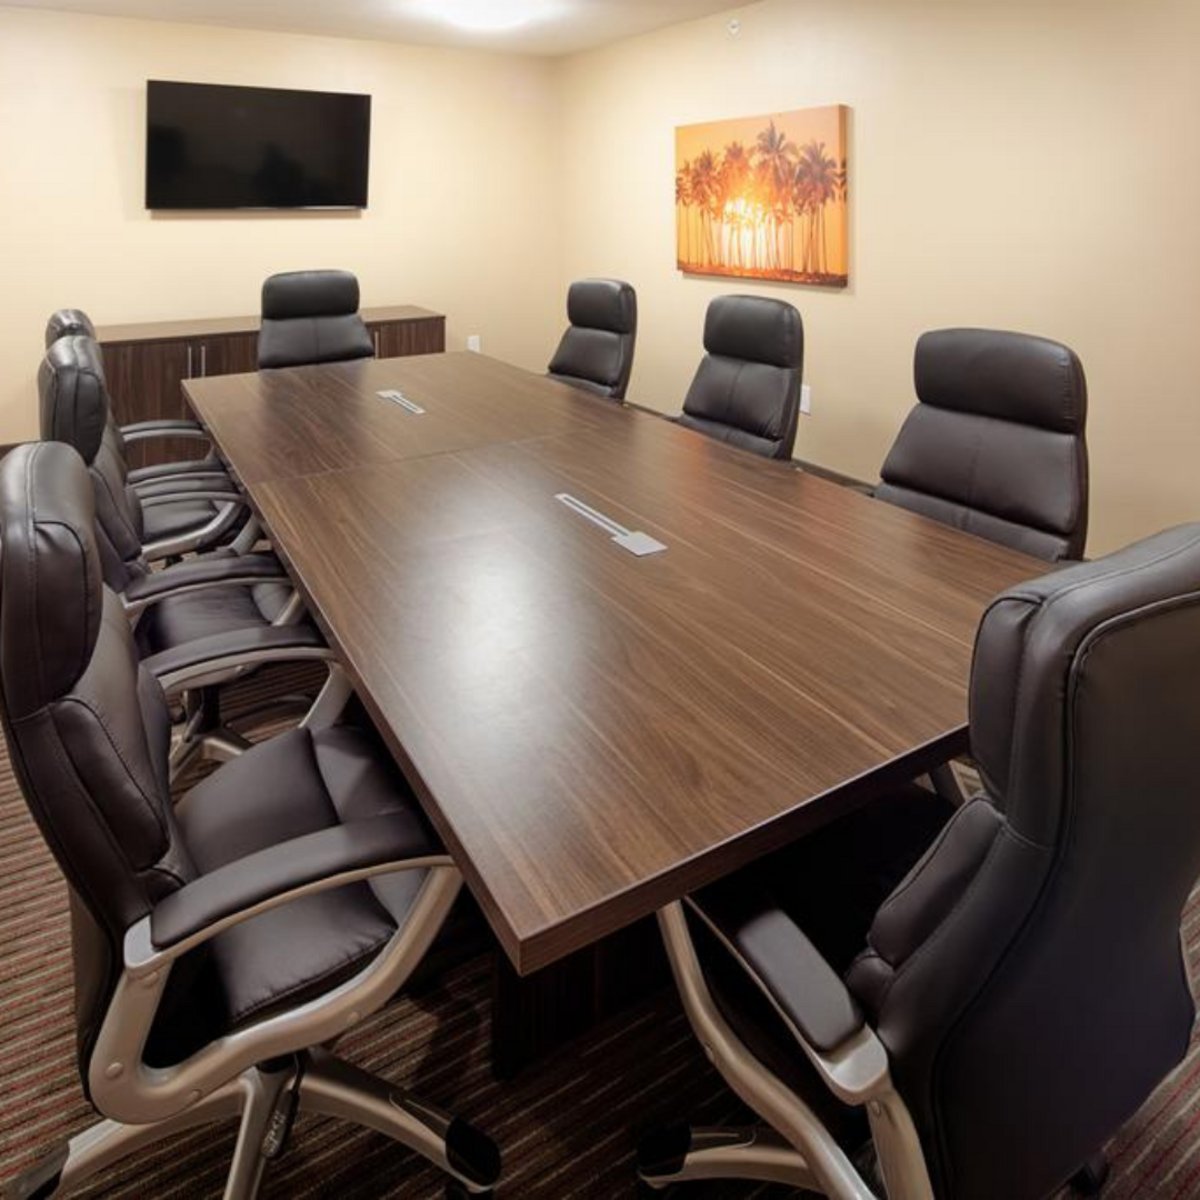 From employee seminars to corporate board meetings, let us help accommodate your needs in our 1,120 square feet of event space. Reach out to our team with your specifications at bit.ly/3hXy7WM. We look forward to hearing from you! #orlandoevents #redlion #eventspace